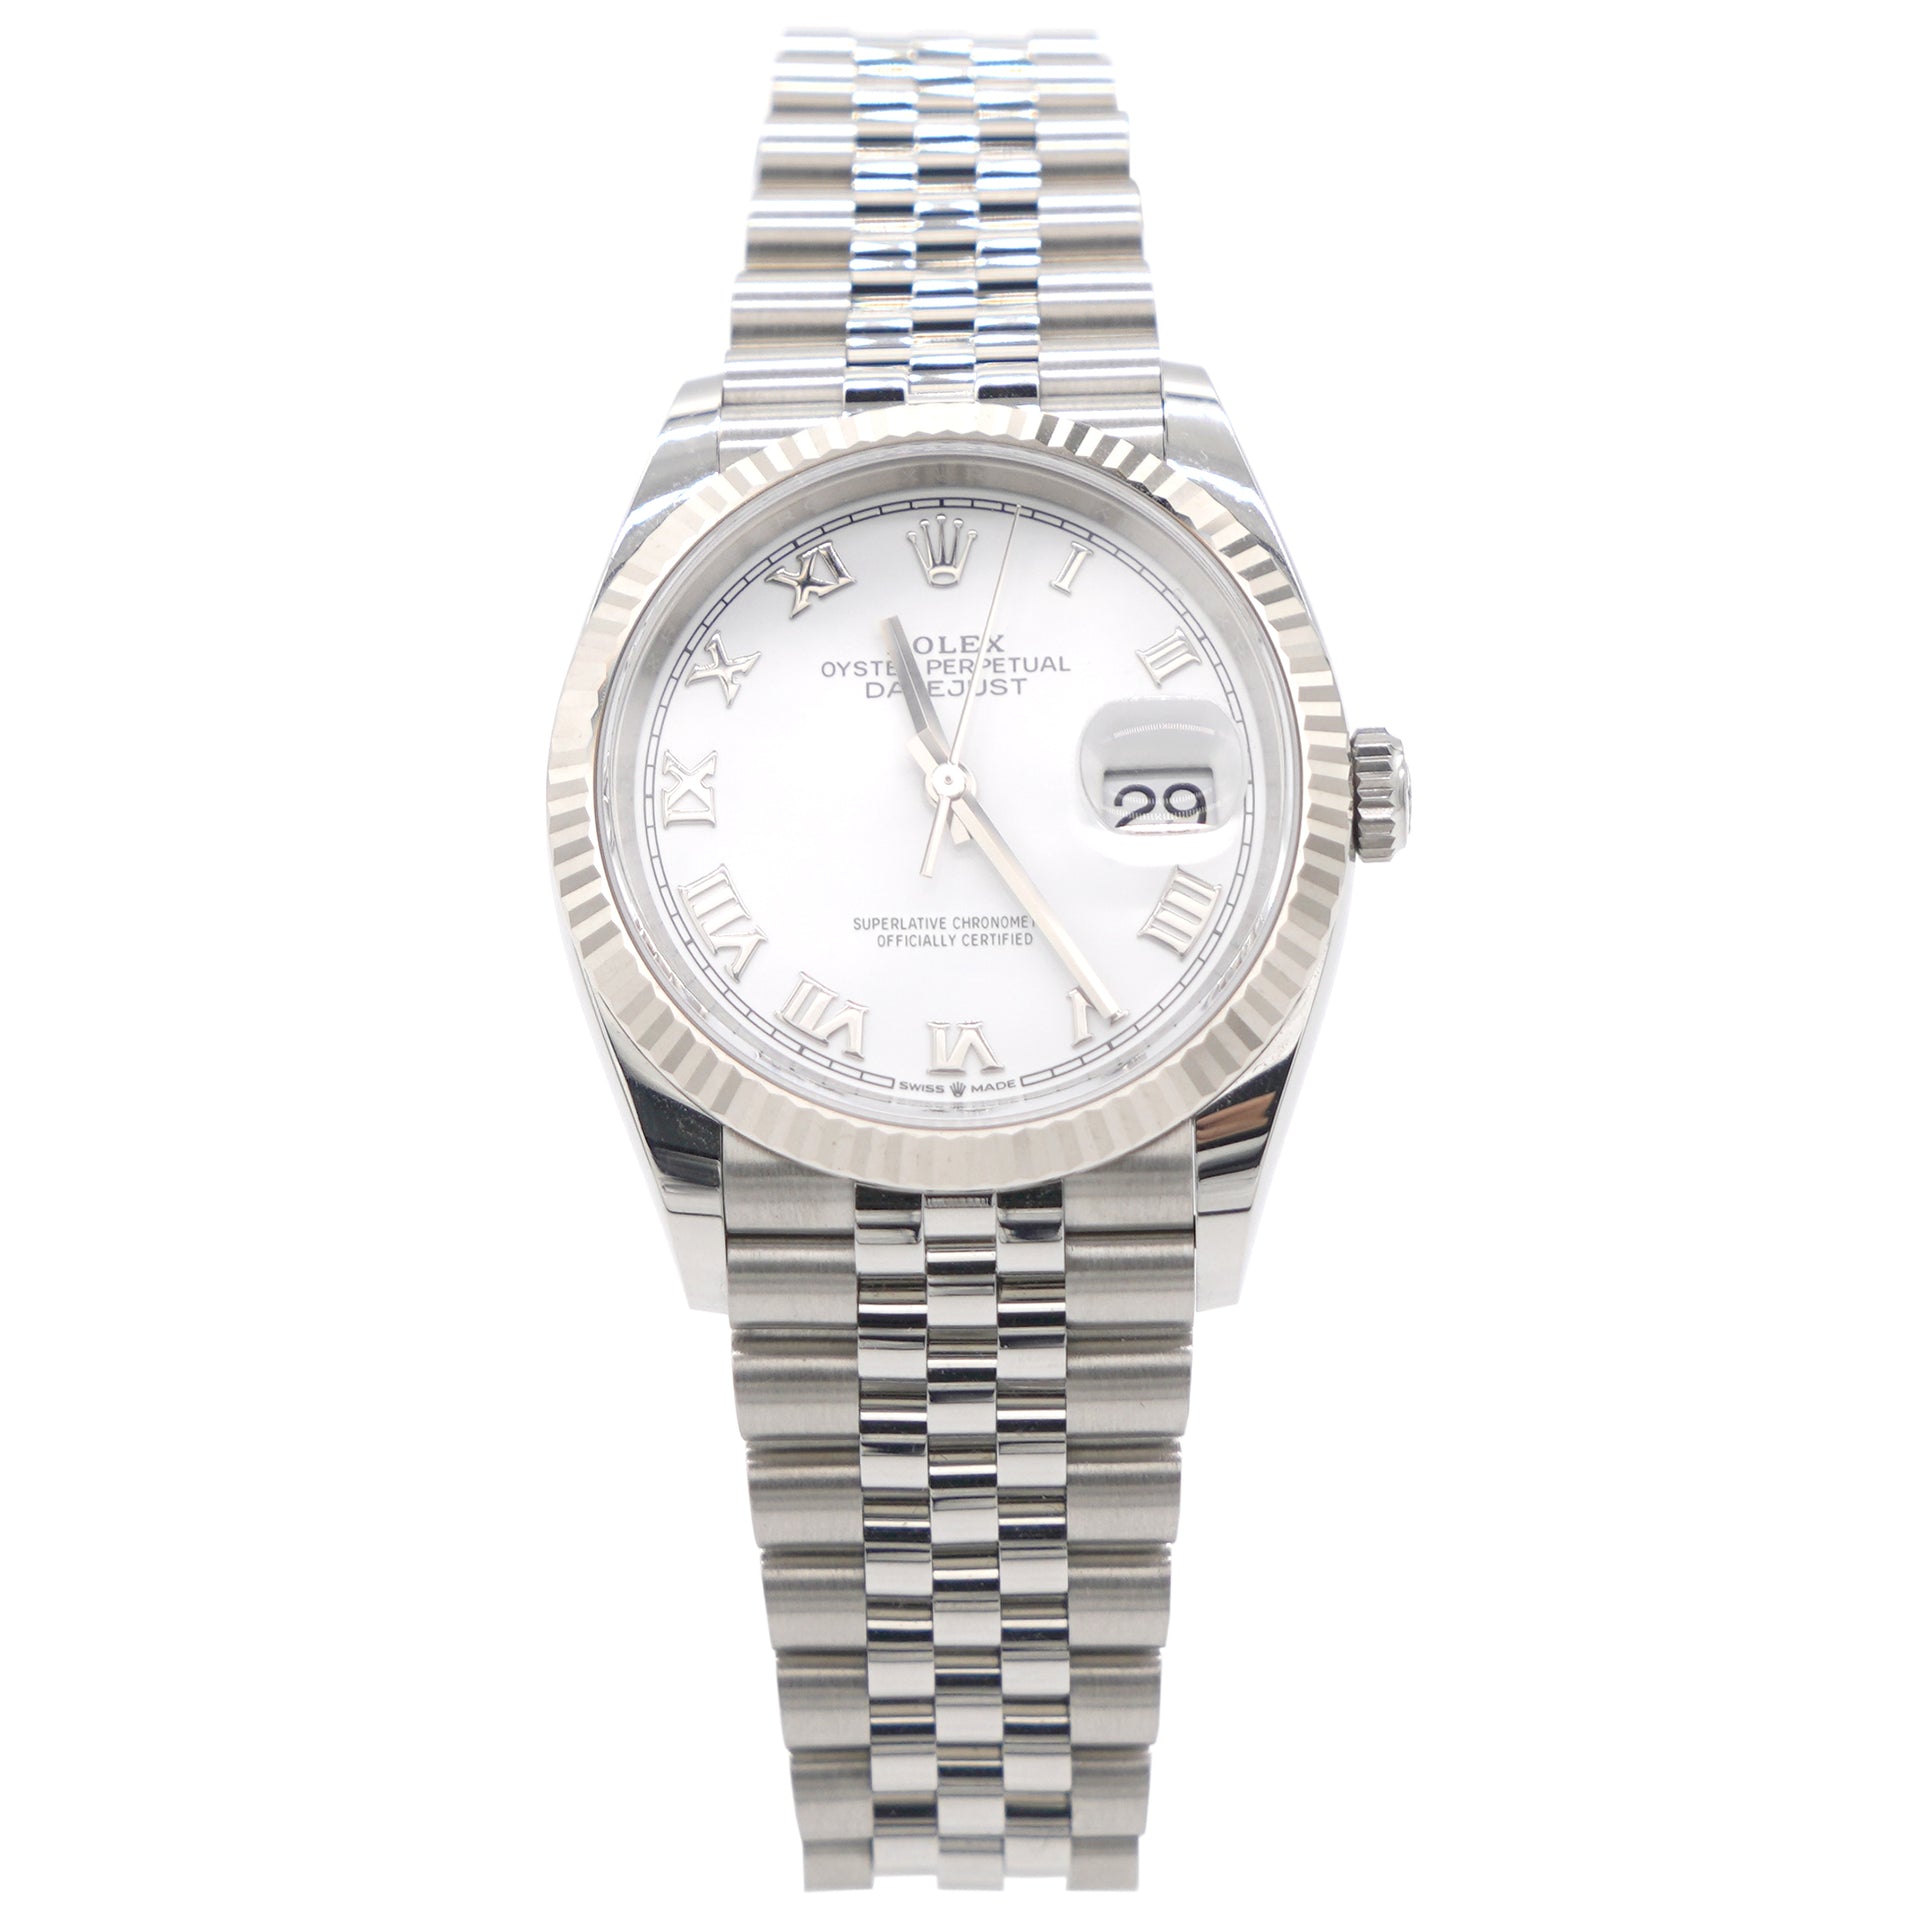 18K White Gold and Stainless Steel Datejust 36mm 126234